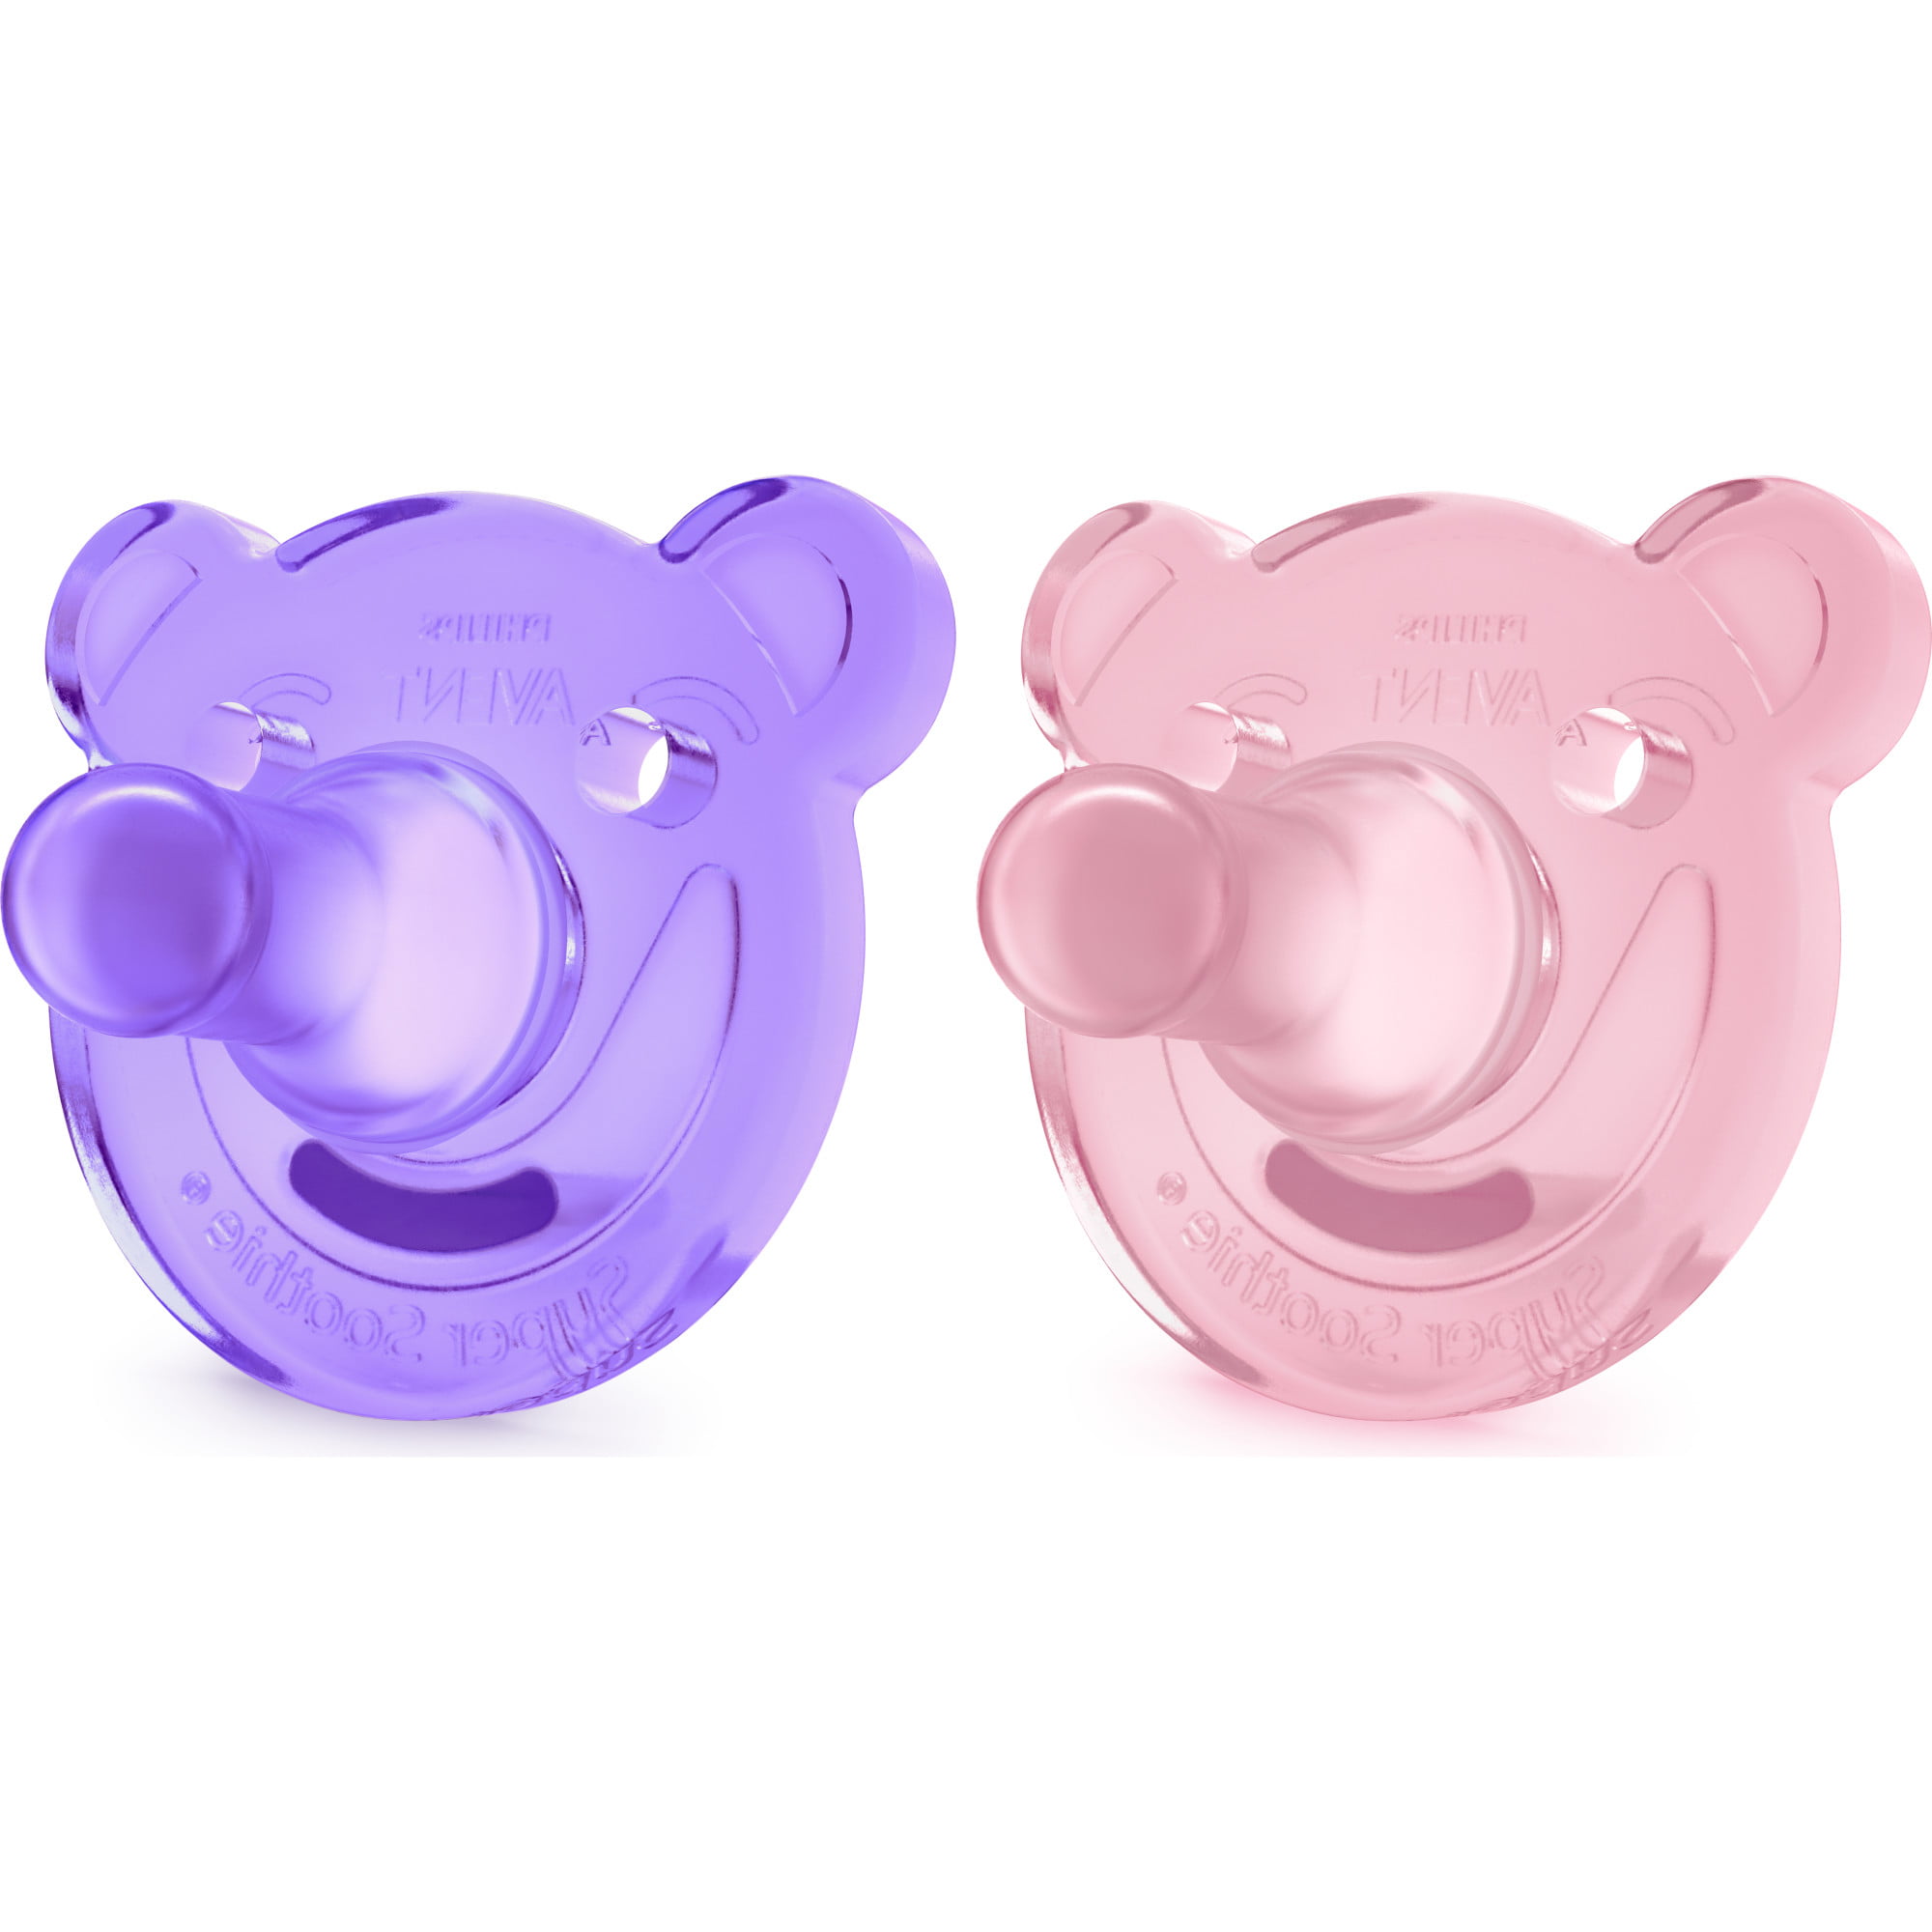 purple soothie pacifier